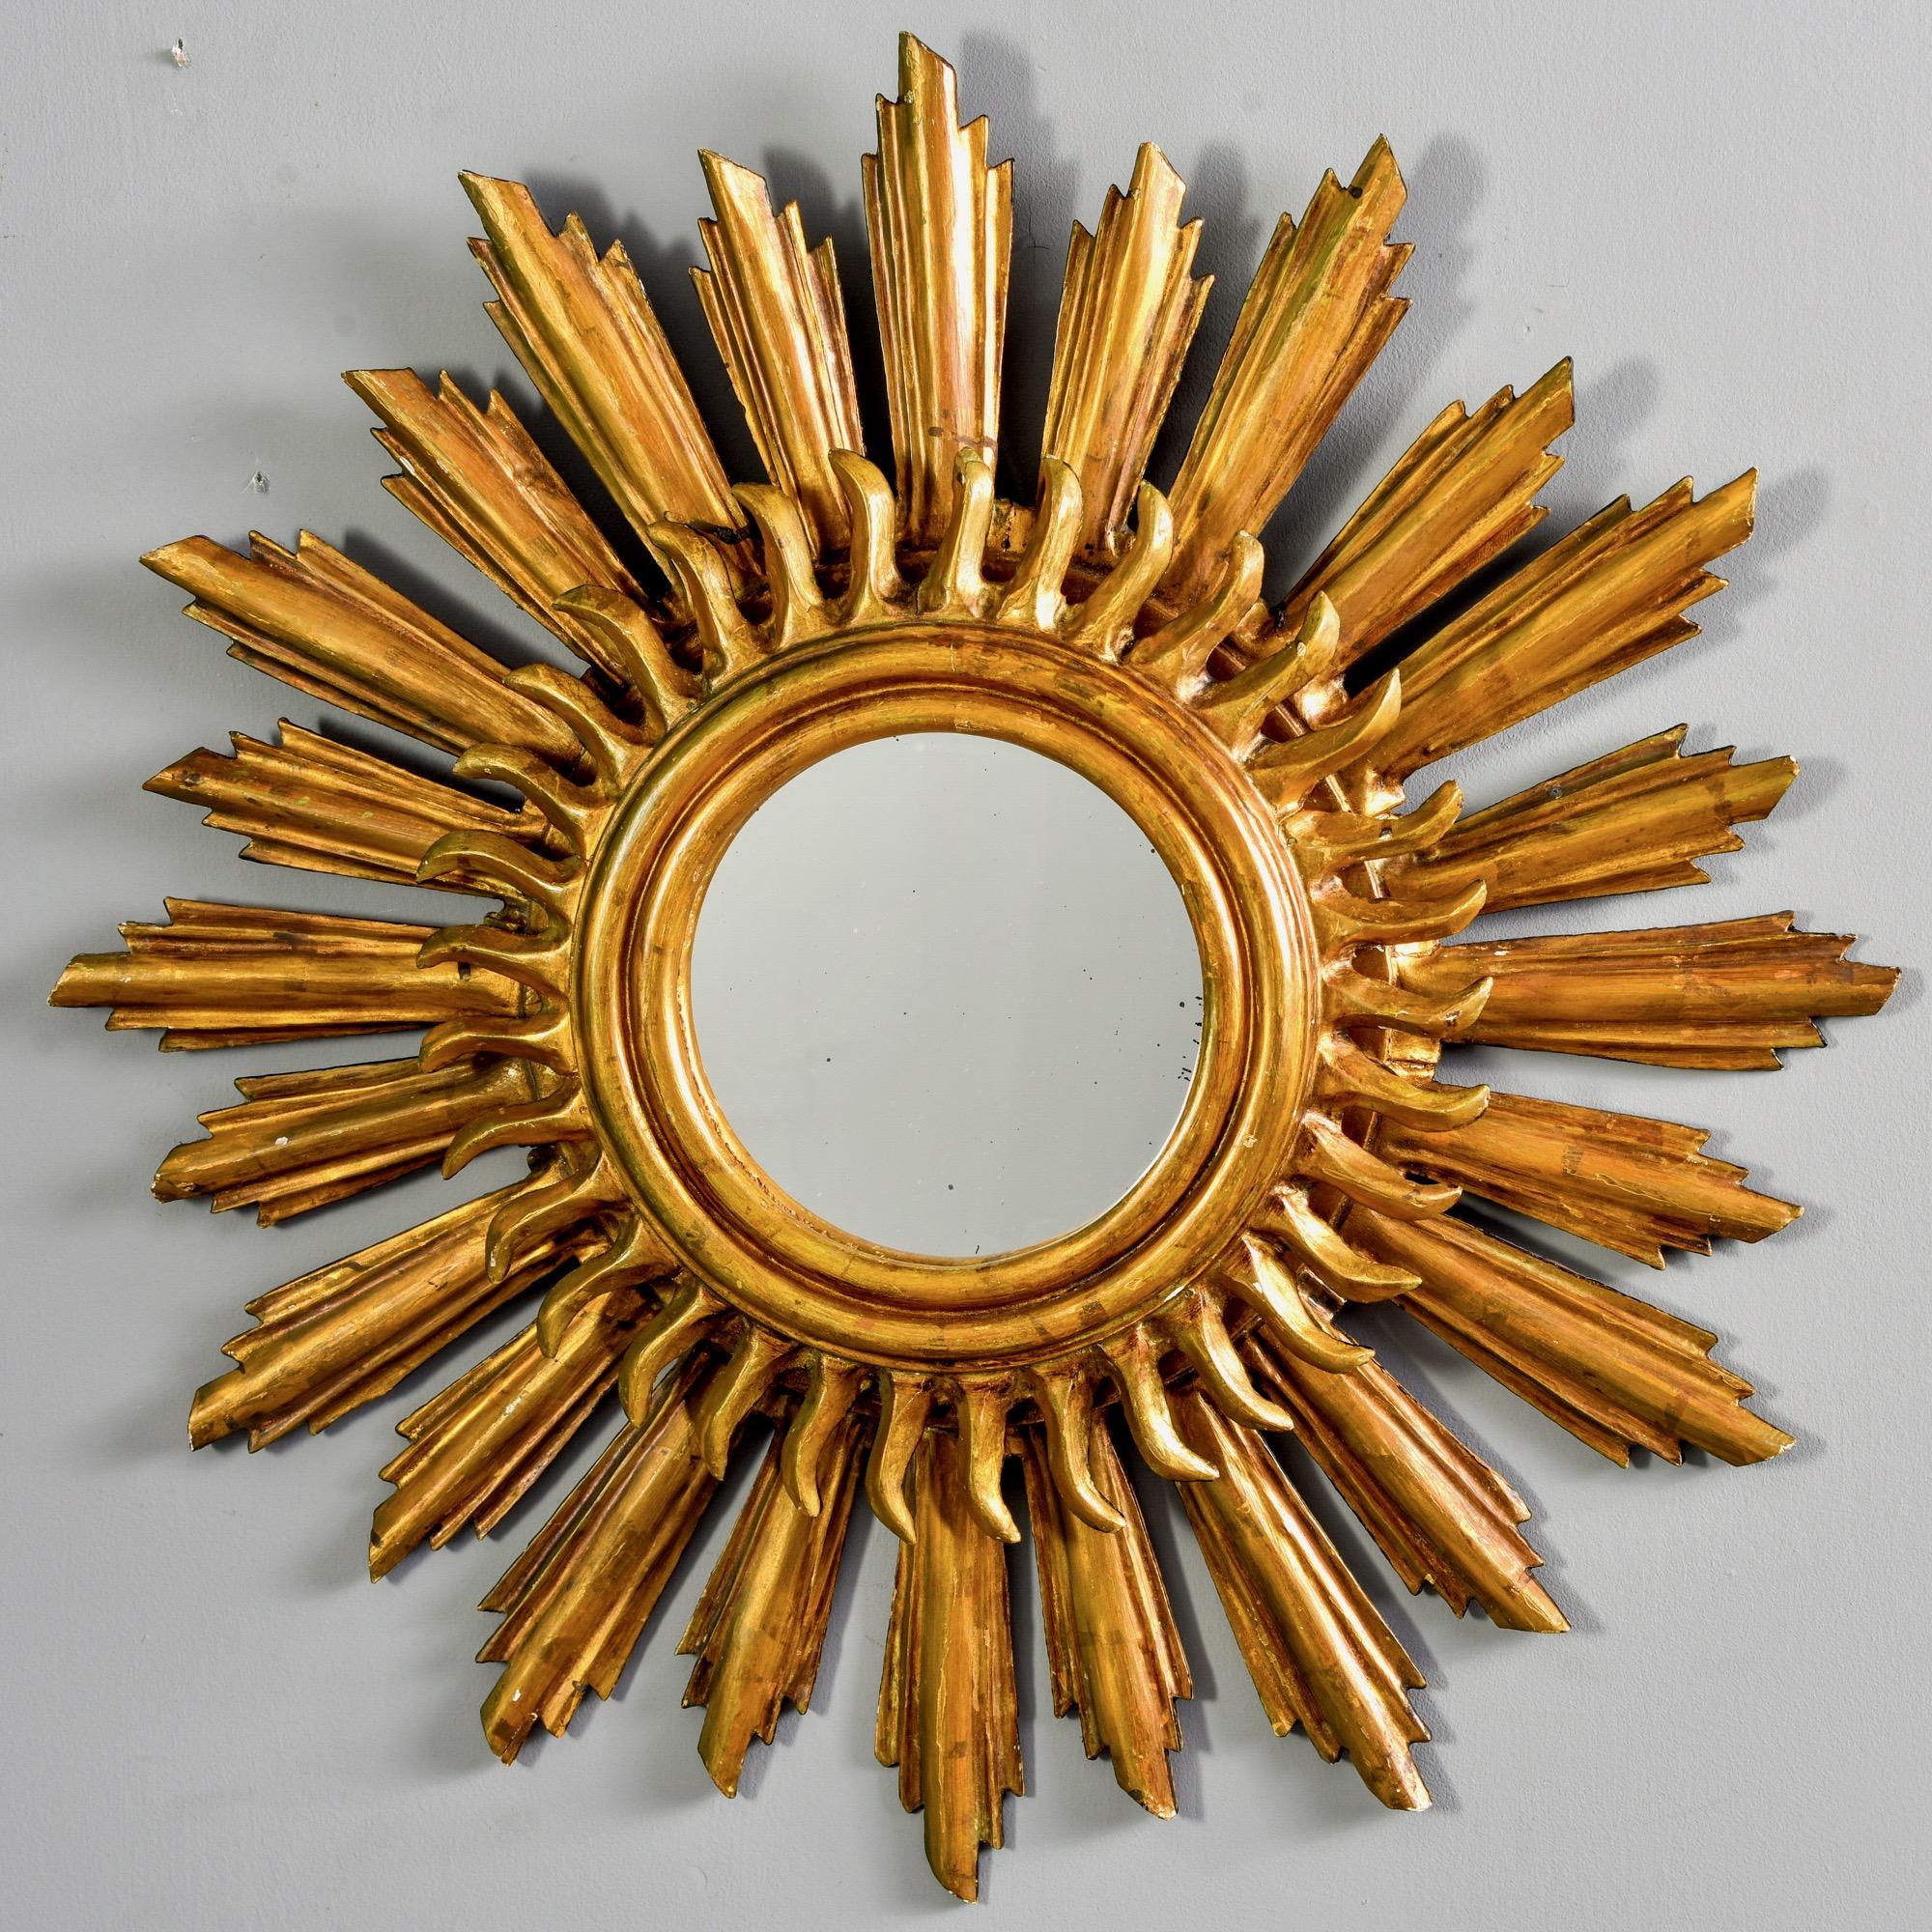 Found in England, this circa 1930s sunburst mirror is made of gilded wood and features a double layer of rays with a round mirror at the center. Unknown maker.

Actual mirror size: 7.5” diameter.